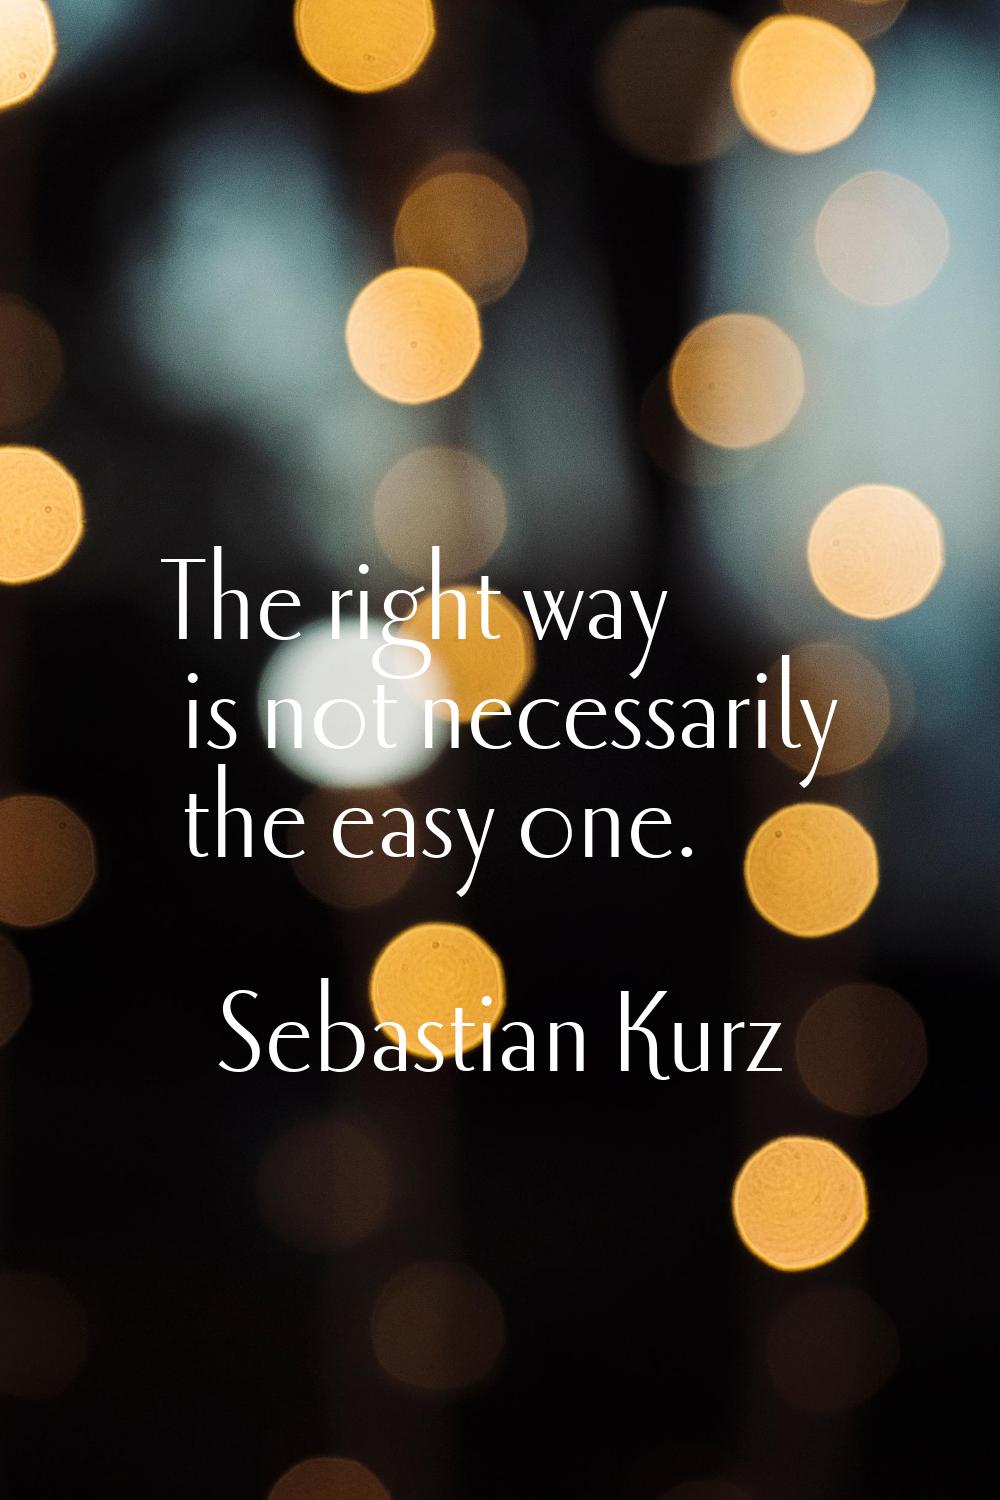 The right way is not necessarily the easy one.